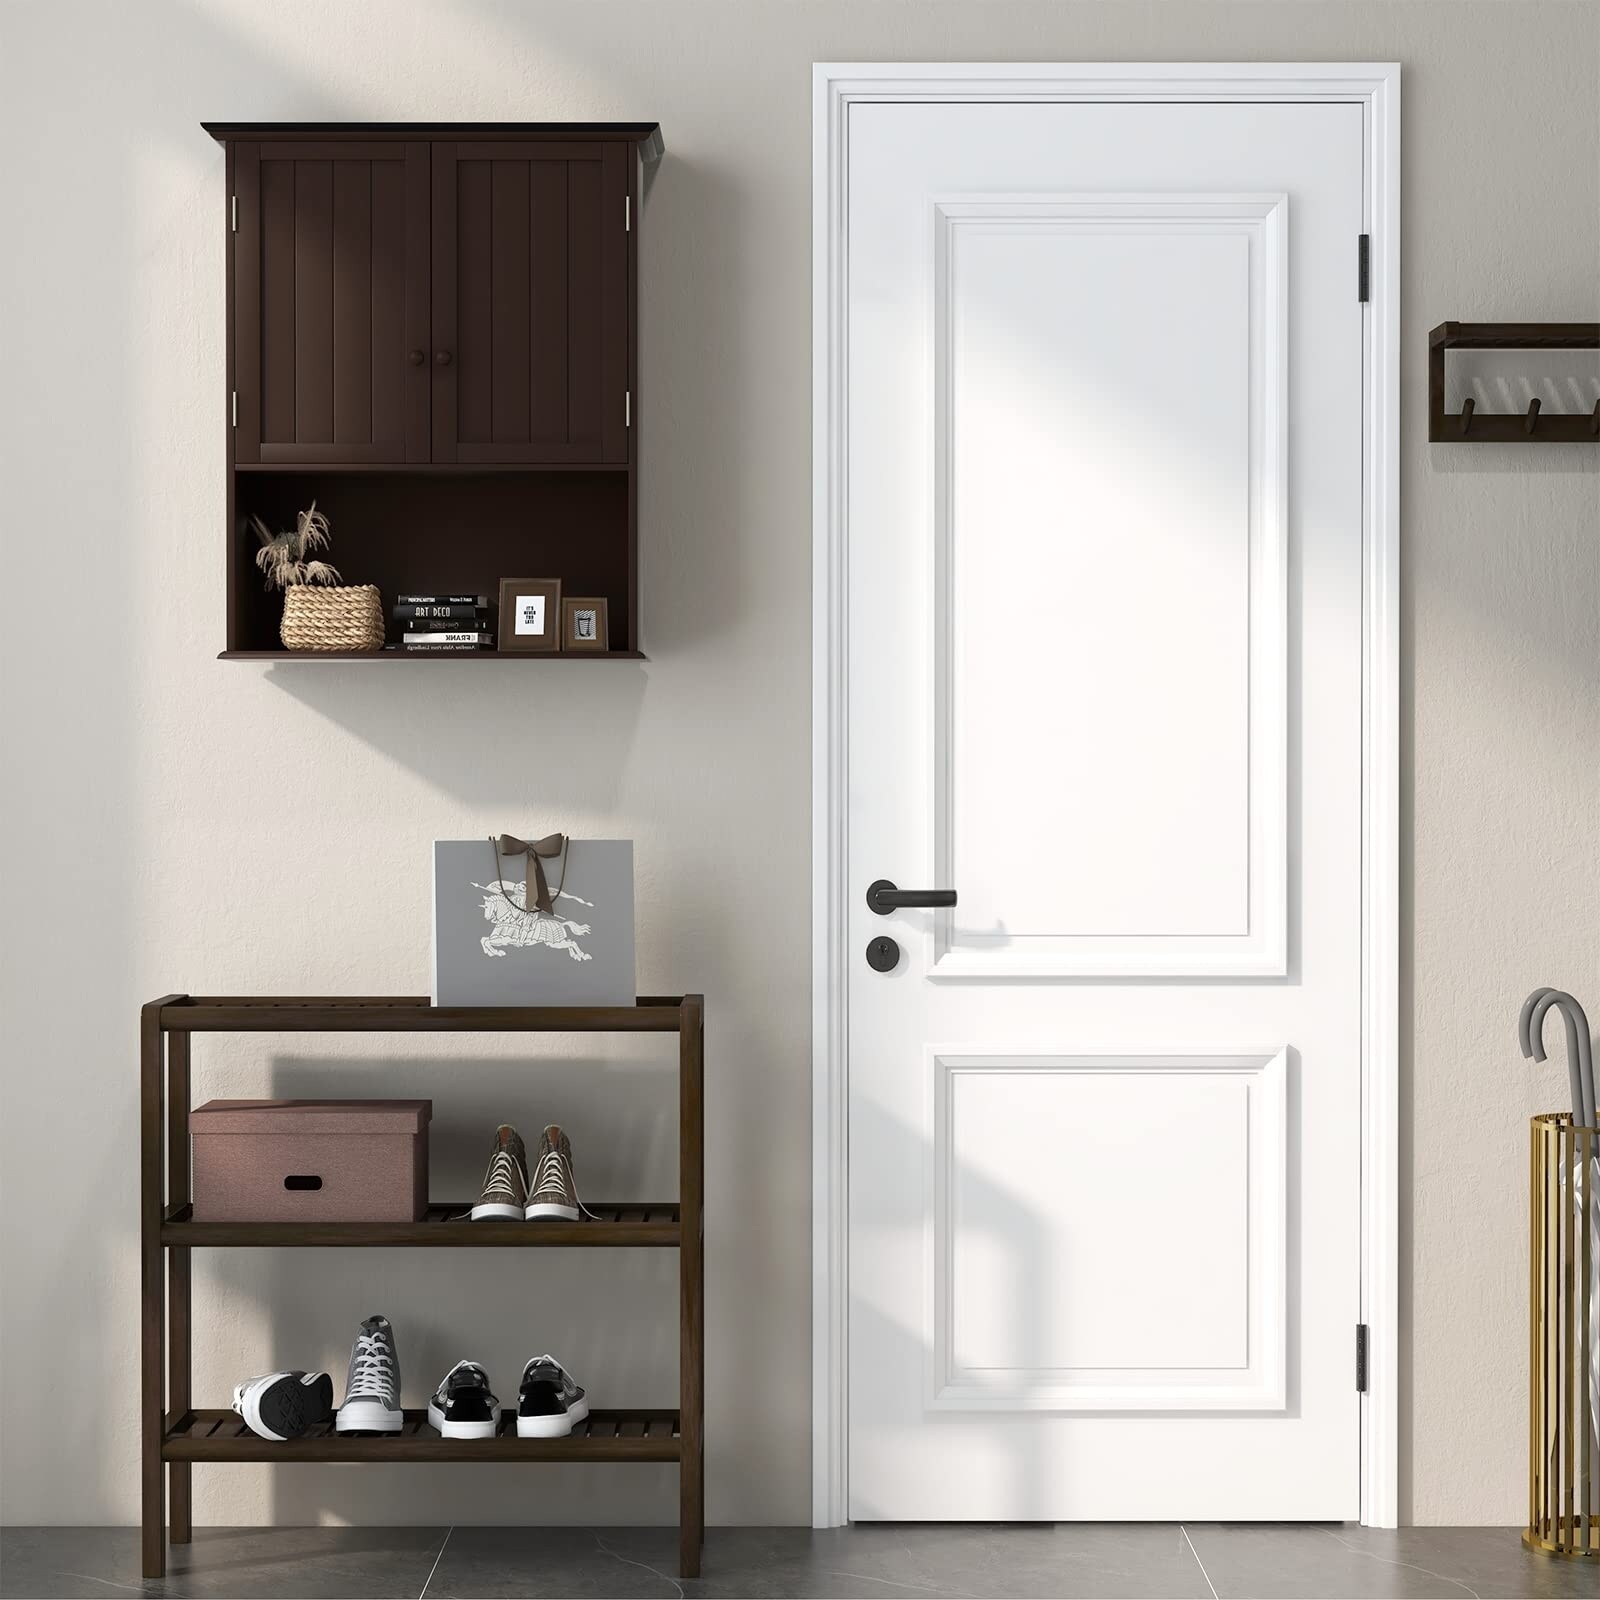 https://ak1.ostkcdn.com/images/products/is/images/direct/9eb2cf09443b207d07095355920c6aeb7396a157/Wall-Mount-Bathroom-Cabinet-Wooden-Medicine-Cabinet-Storage-Organizer-with-2-Doors-and-1-Shelf-Cottage-Collection-Wall-Cabinet.jpg